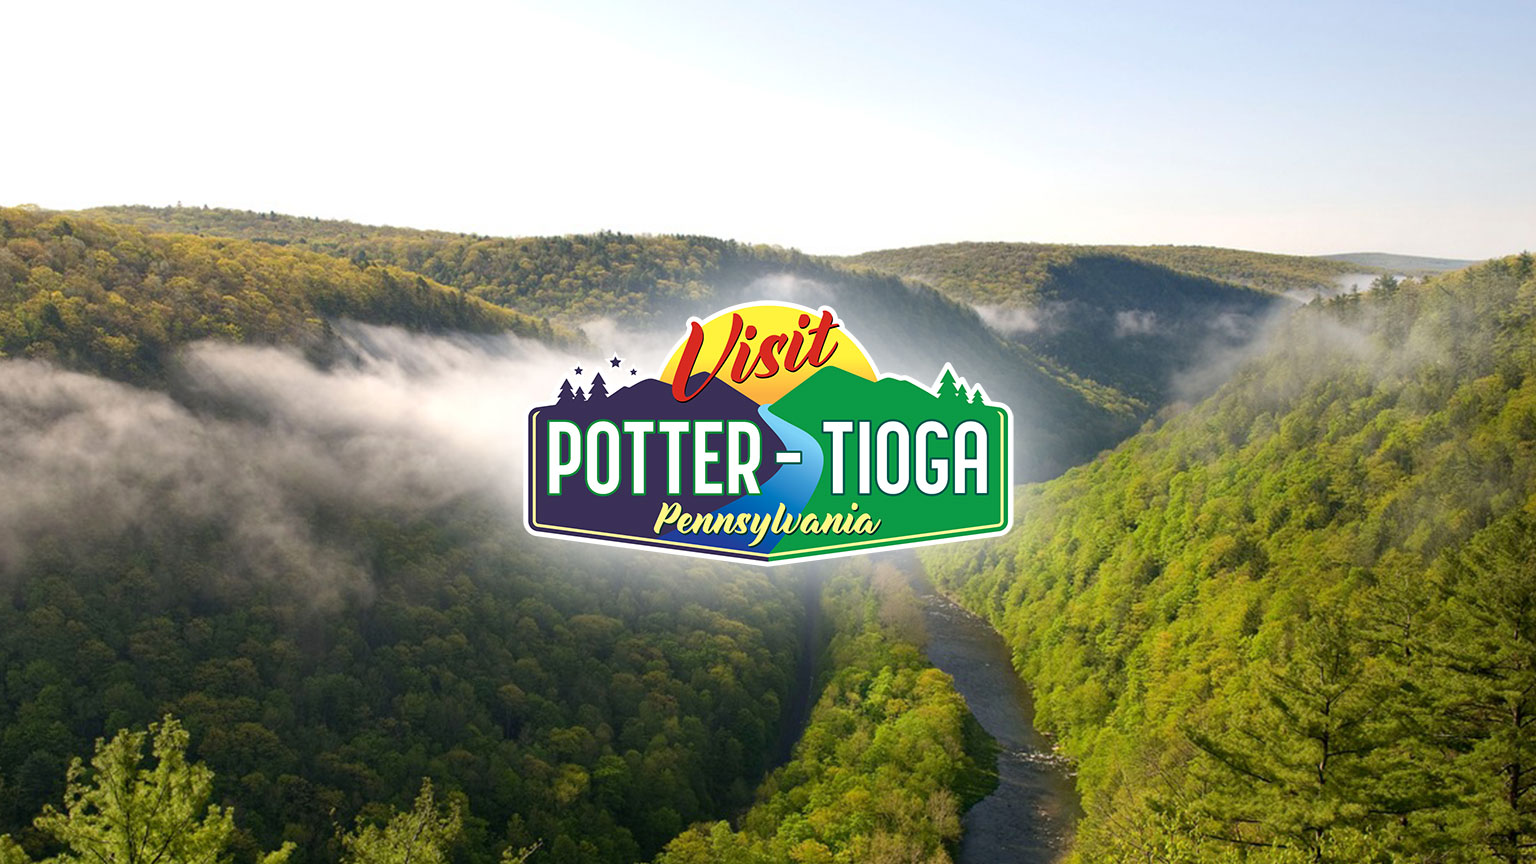 Visit Potter-Tioga PA has launched its newly redesigned website